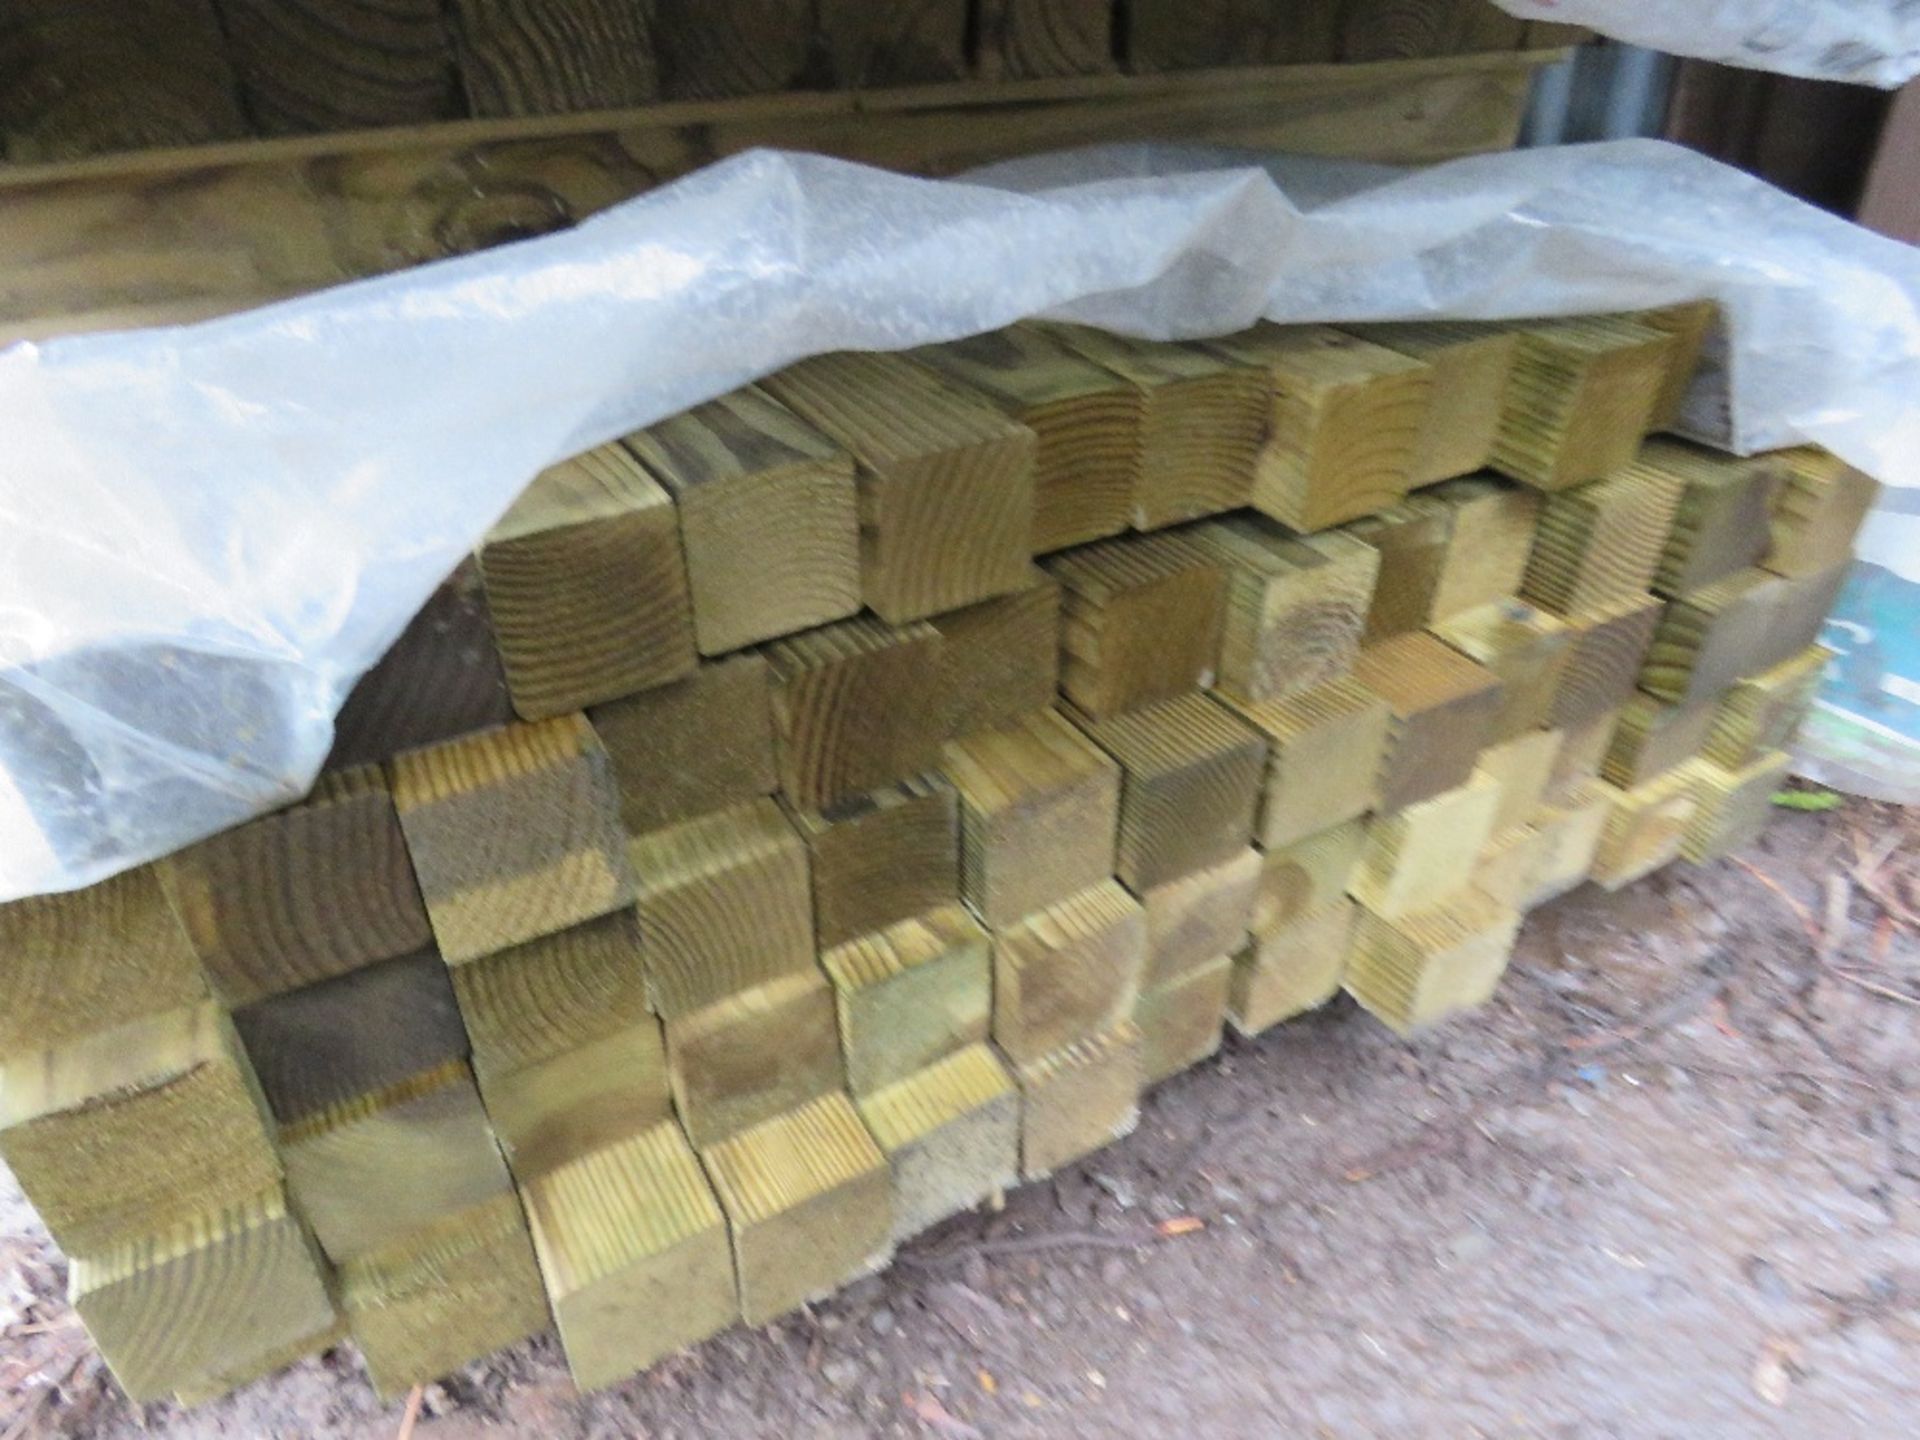 LARGE STACK OF ASSORTED TIMBER POSTS 81NO. APPROX. 2.1MX5.5CMX8CM 106NO. APPROX. 2.1MX7CMX6CM - Image 4 of 4